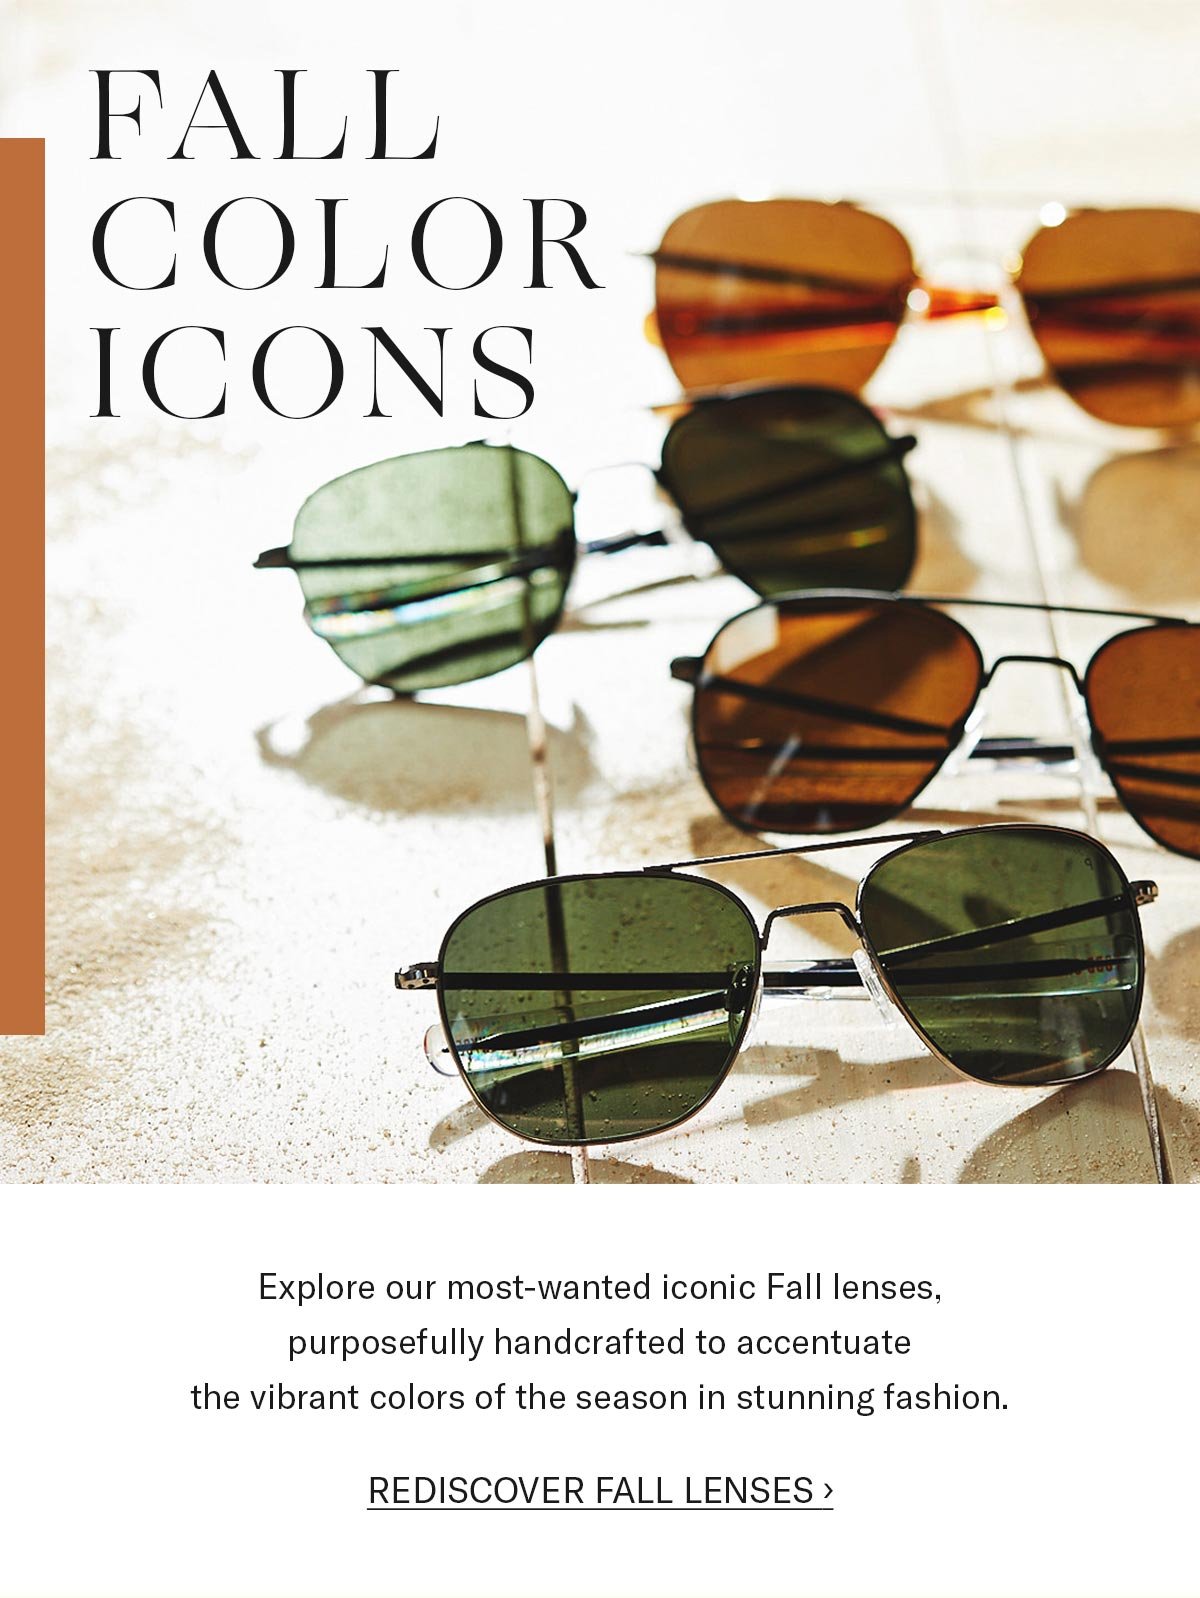 Rediscover Iconic Fall Lenses >